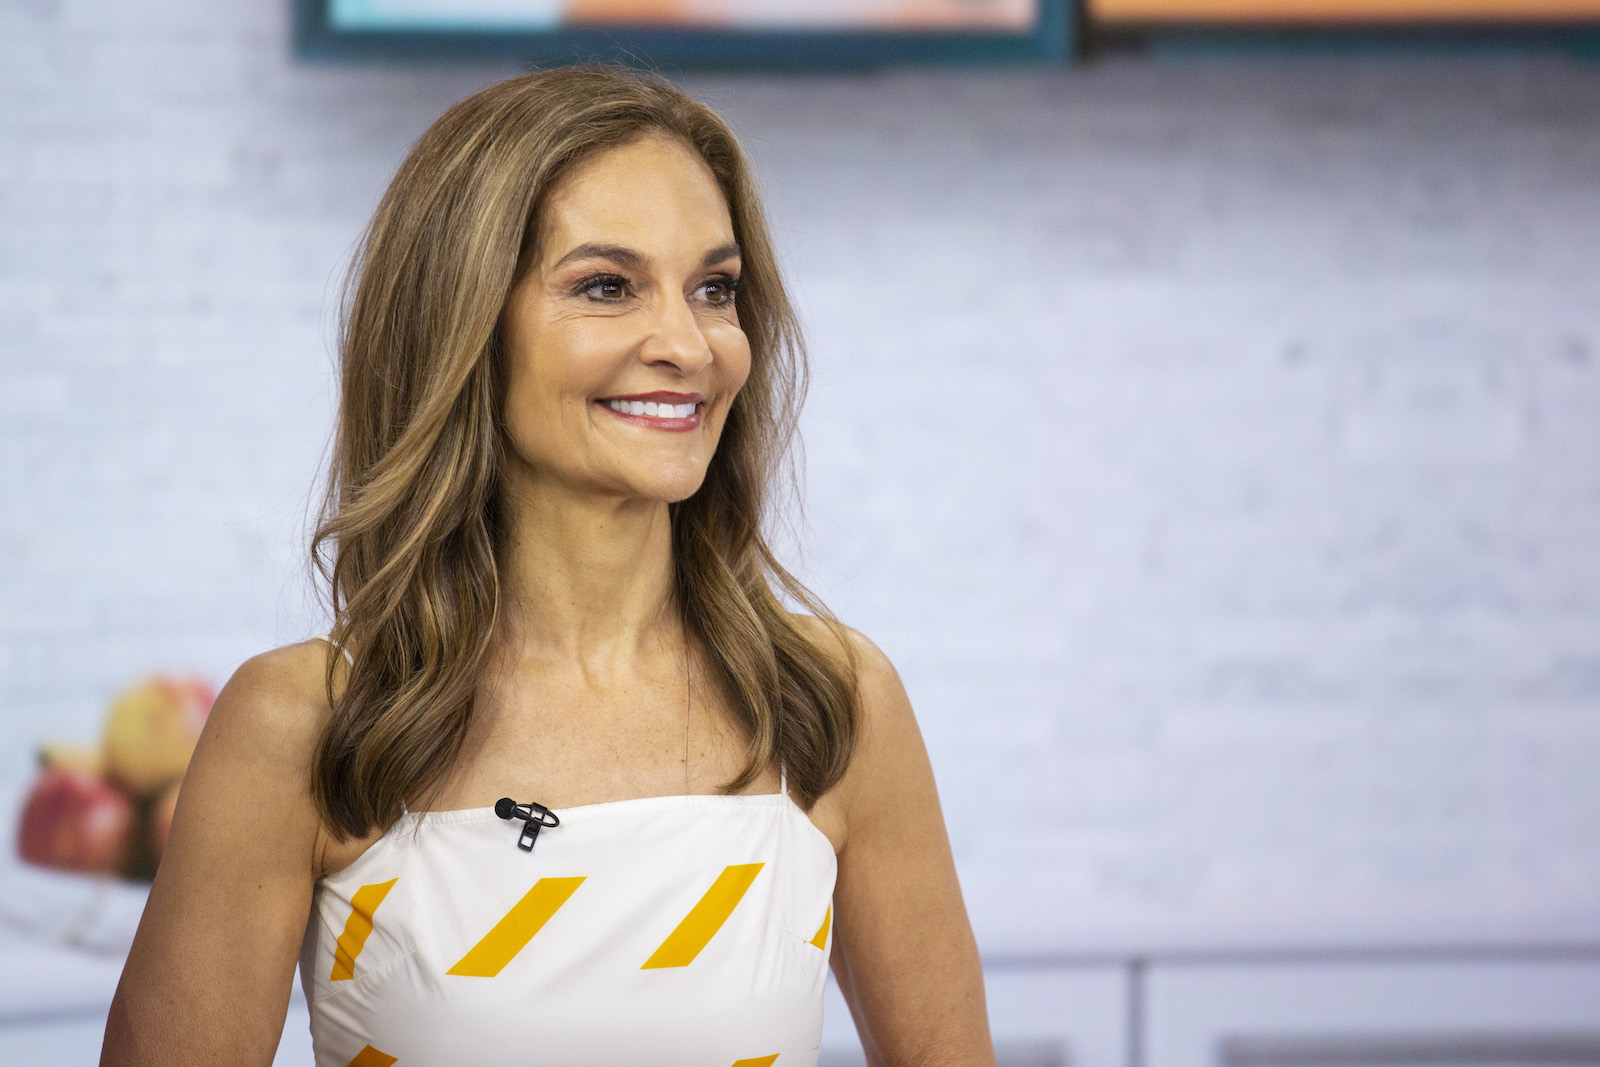 Joy Bauer appeared on The Today Show in 2019